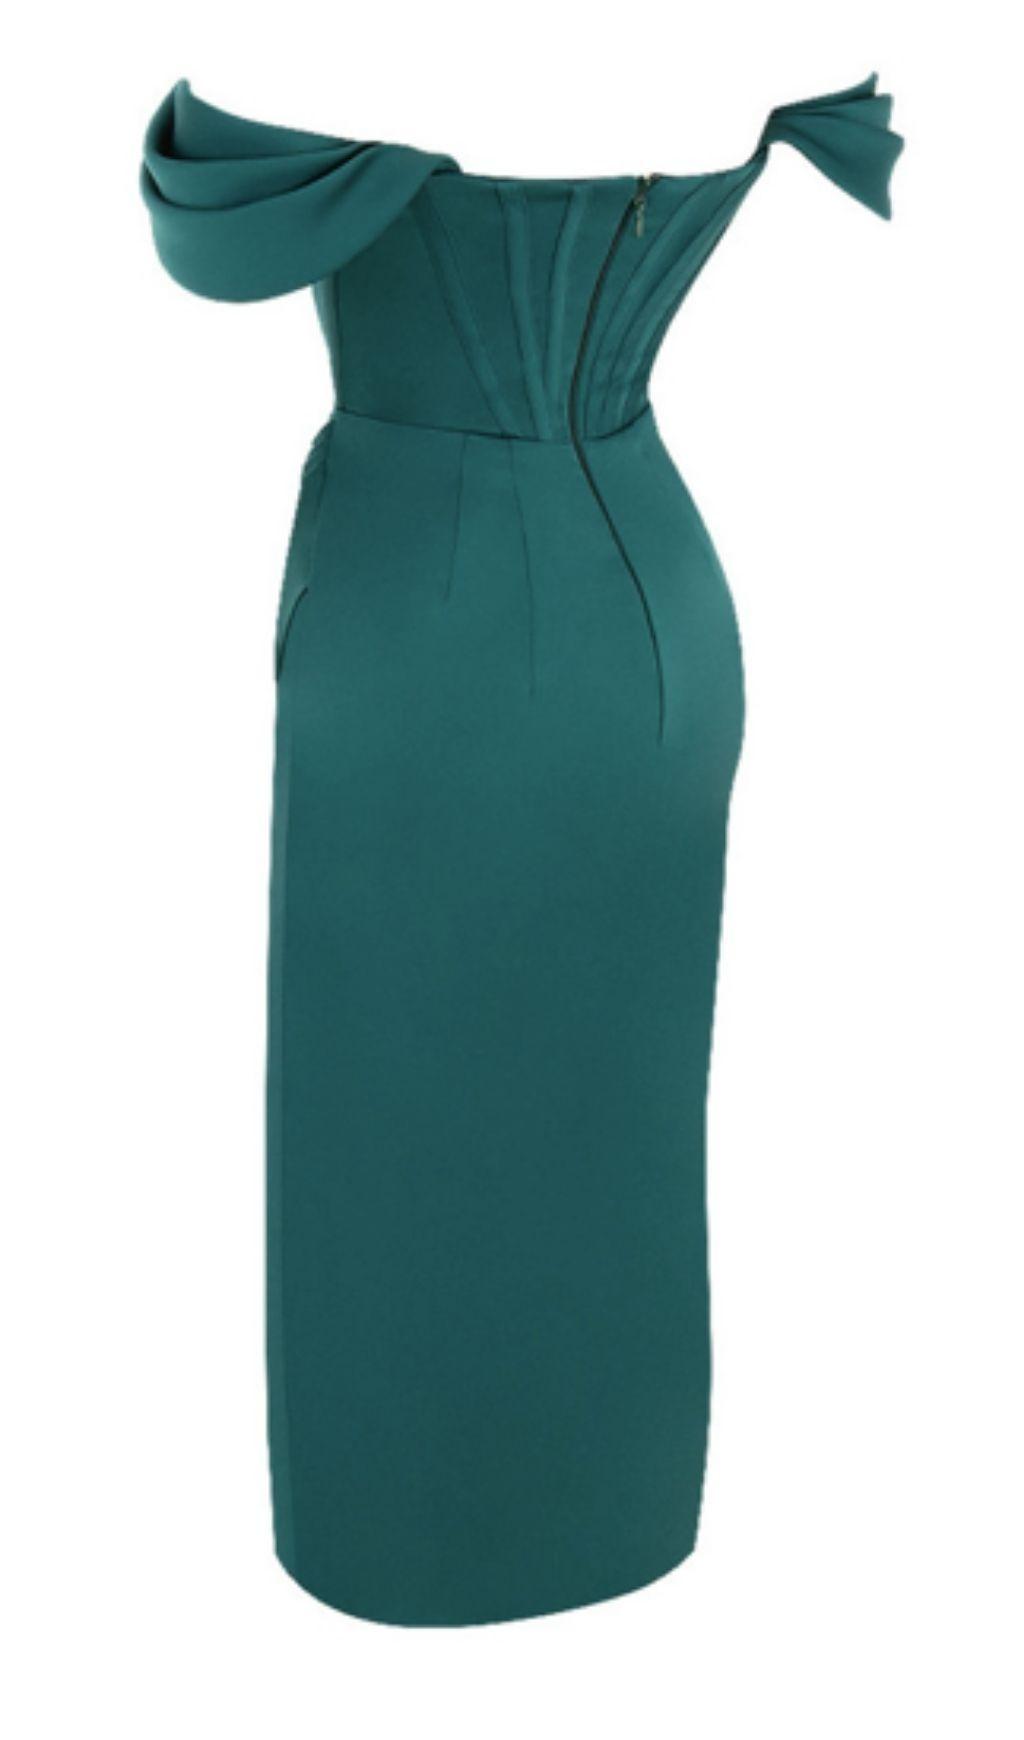 EMERALD STAIN STRAPLESS RUCHED MIDI DRESS